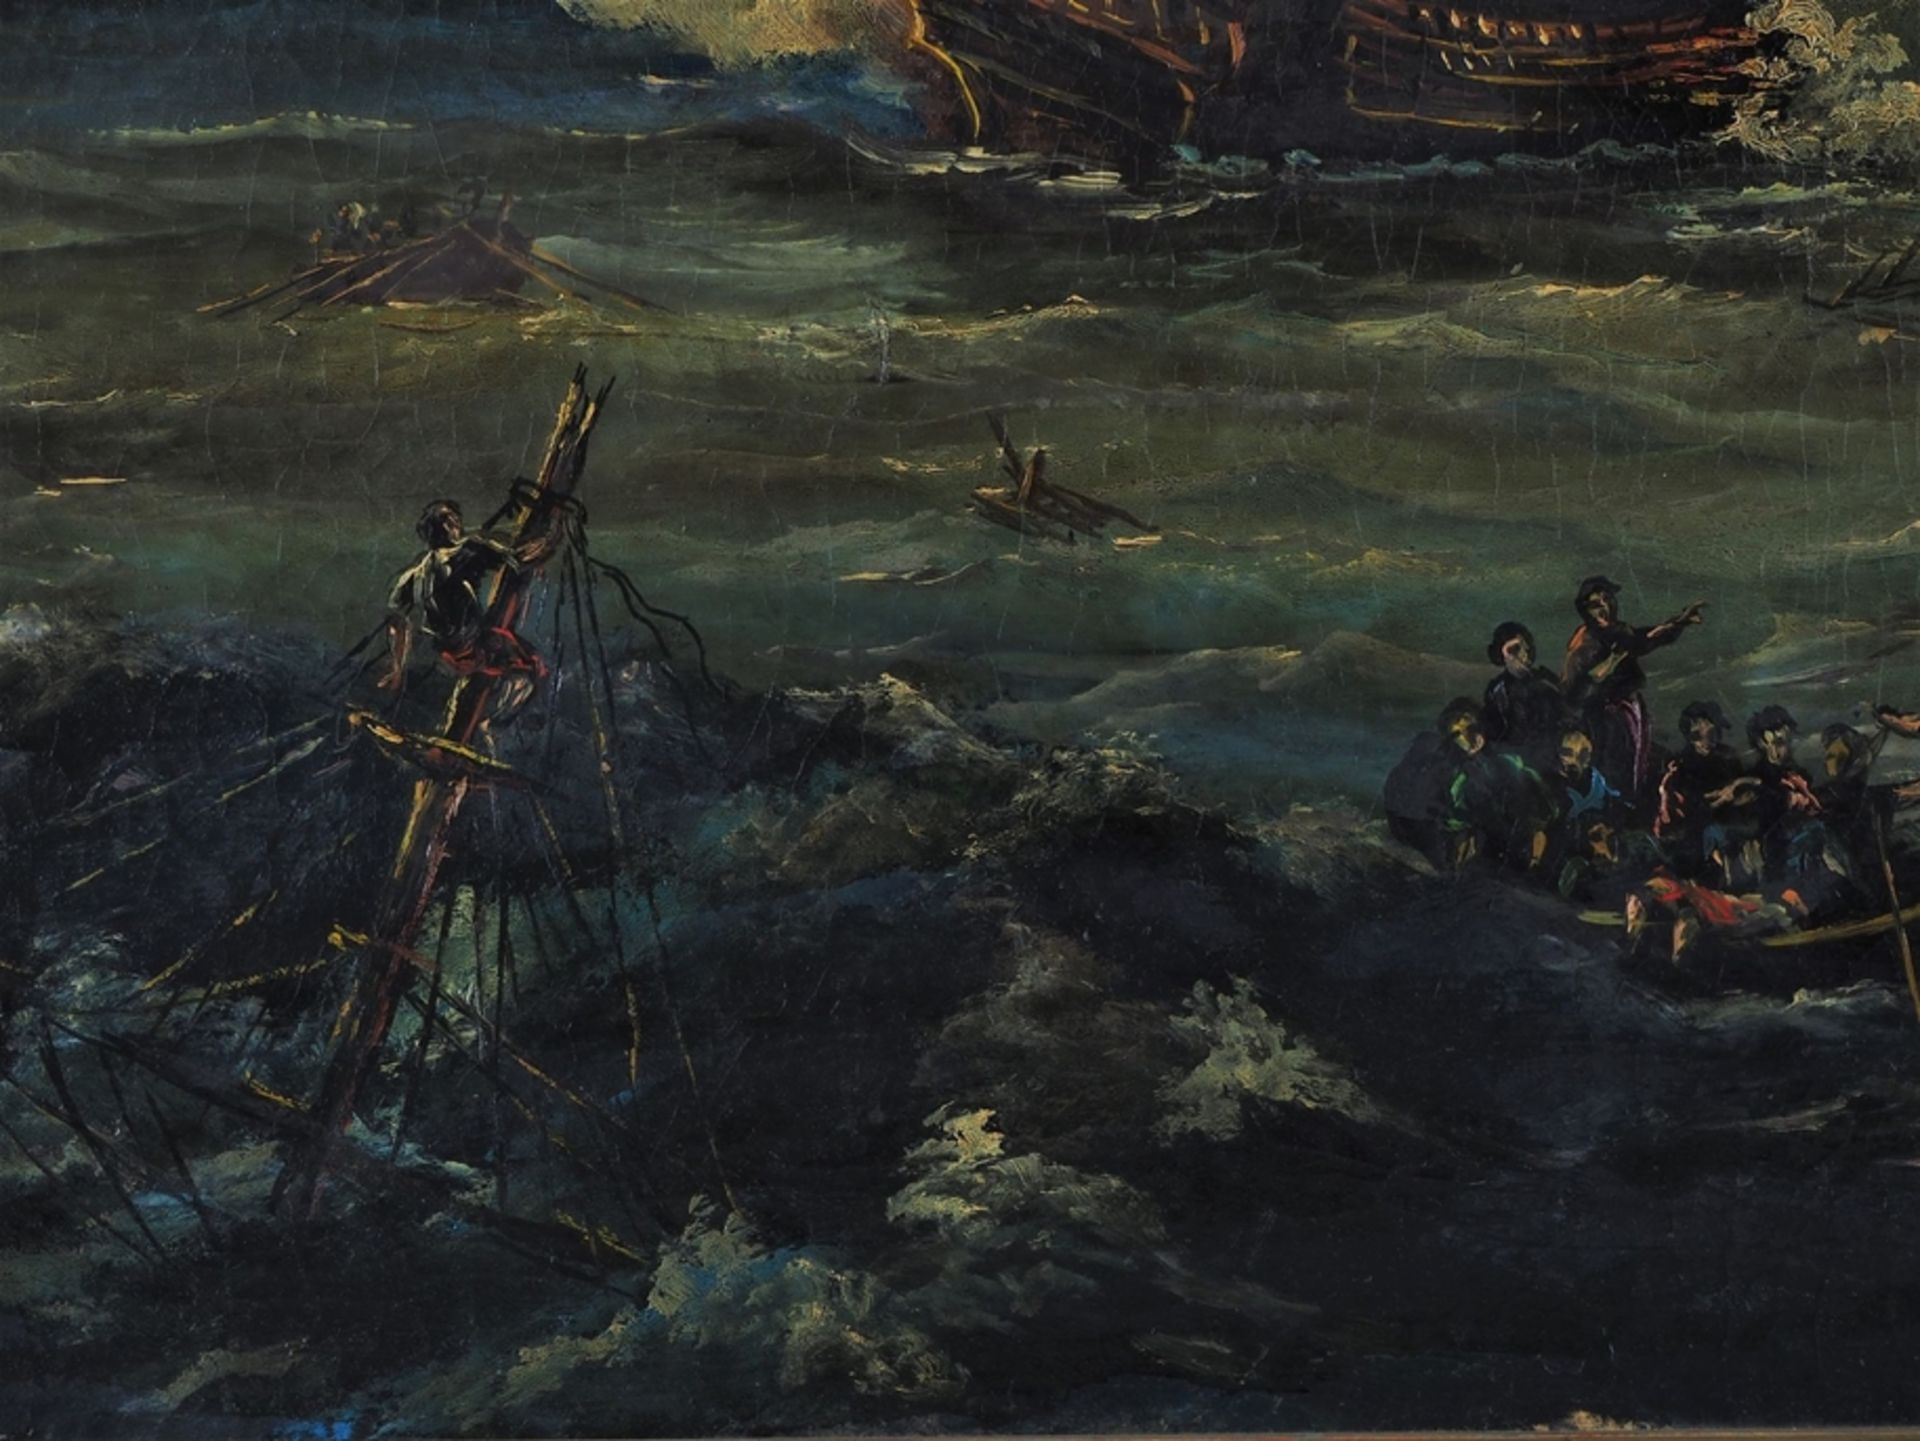 Painting Sea Battle, after old master, 19th century. - Image 3 of 5